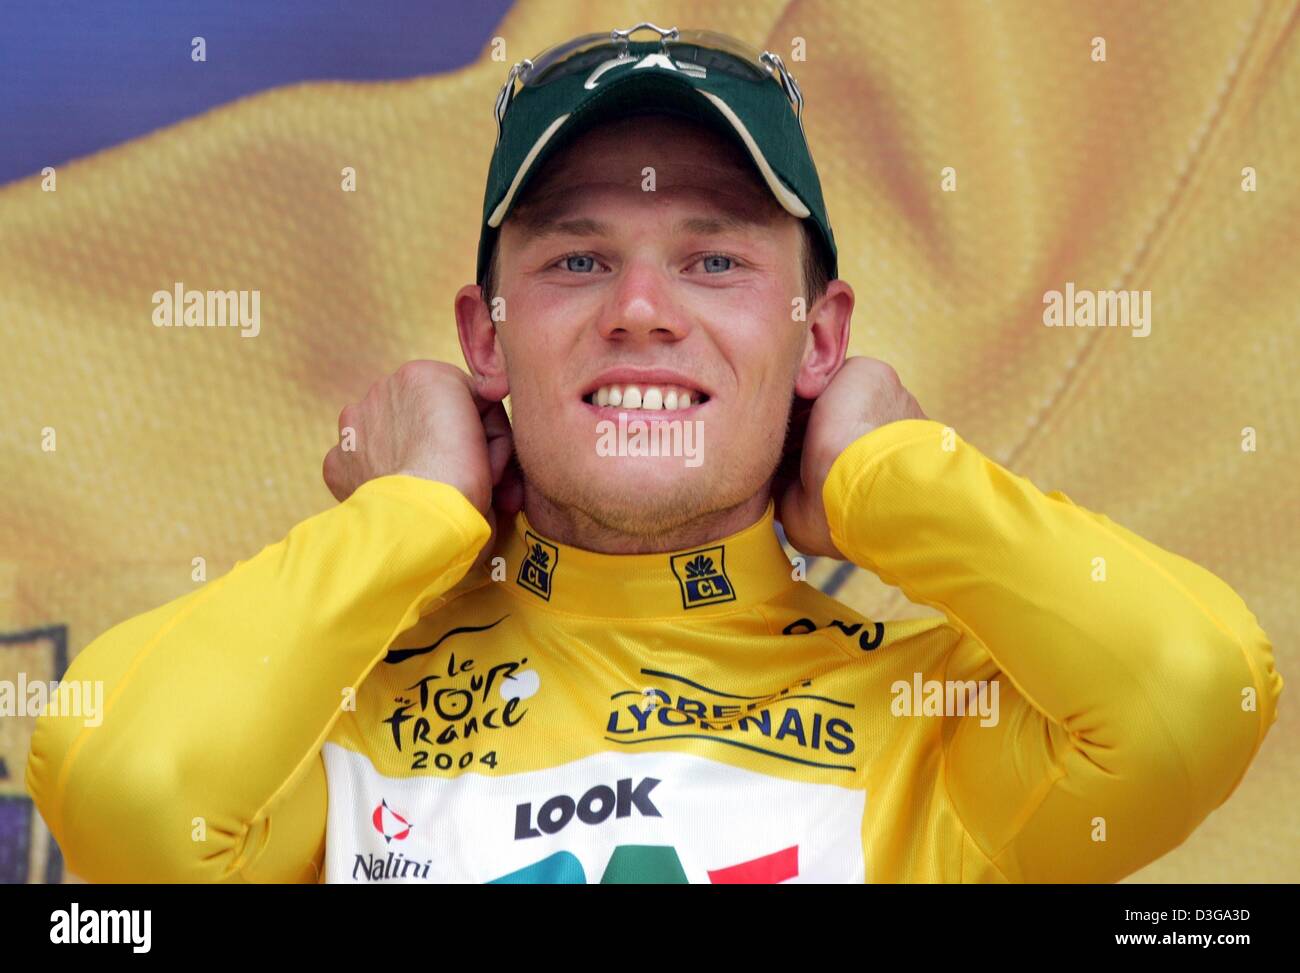 (dpa) - Norwegian cyclist Thor Hushovd of team Credit Agricole smiles after receiving the yellow jersey of the overall leader after the second stage of the Tour de France in Namur, Belgium, 5 July 2004. The second and 197km long stage of the 91st Tour de France cycling race took the cyclists from Charleroi to Namur. A second place finish in the stage was enough for Hushovd to take  Stock Photo